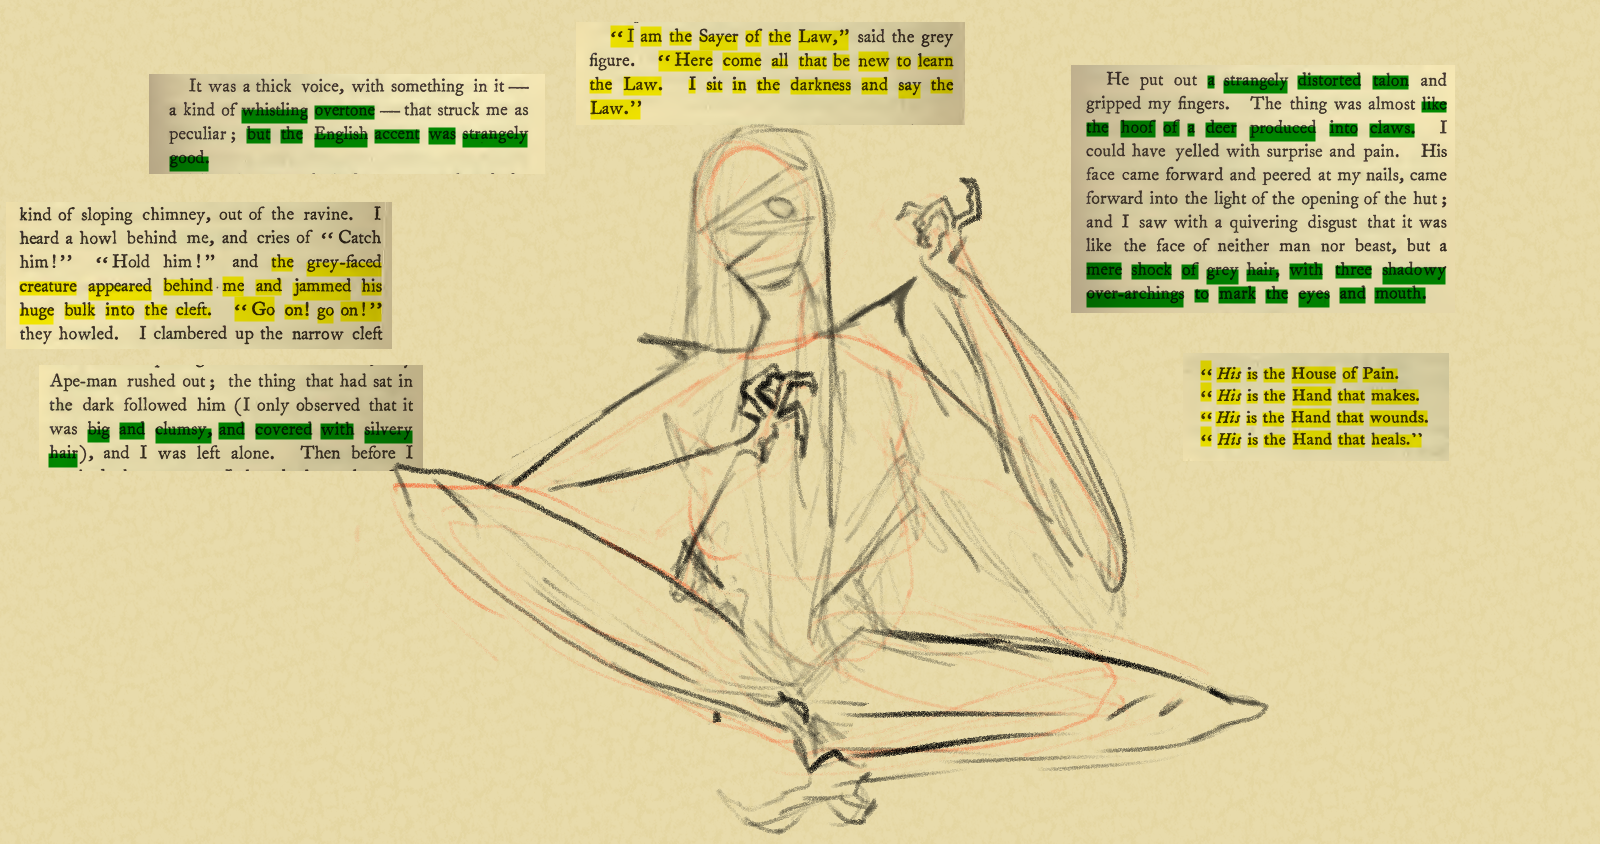 A sketch of The Sayer of the Law, a tall humanoid figure. It has long hair, a bandaged face, and bird-like talons. The sketches are surrounded with highlighted passages from the book, focusing on the original character's appearance and personality.